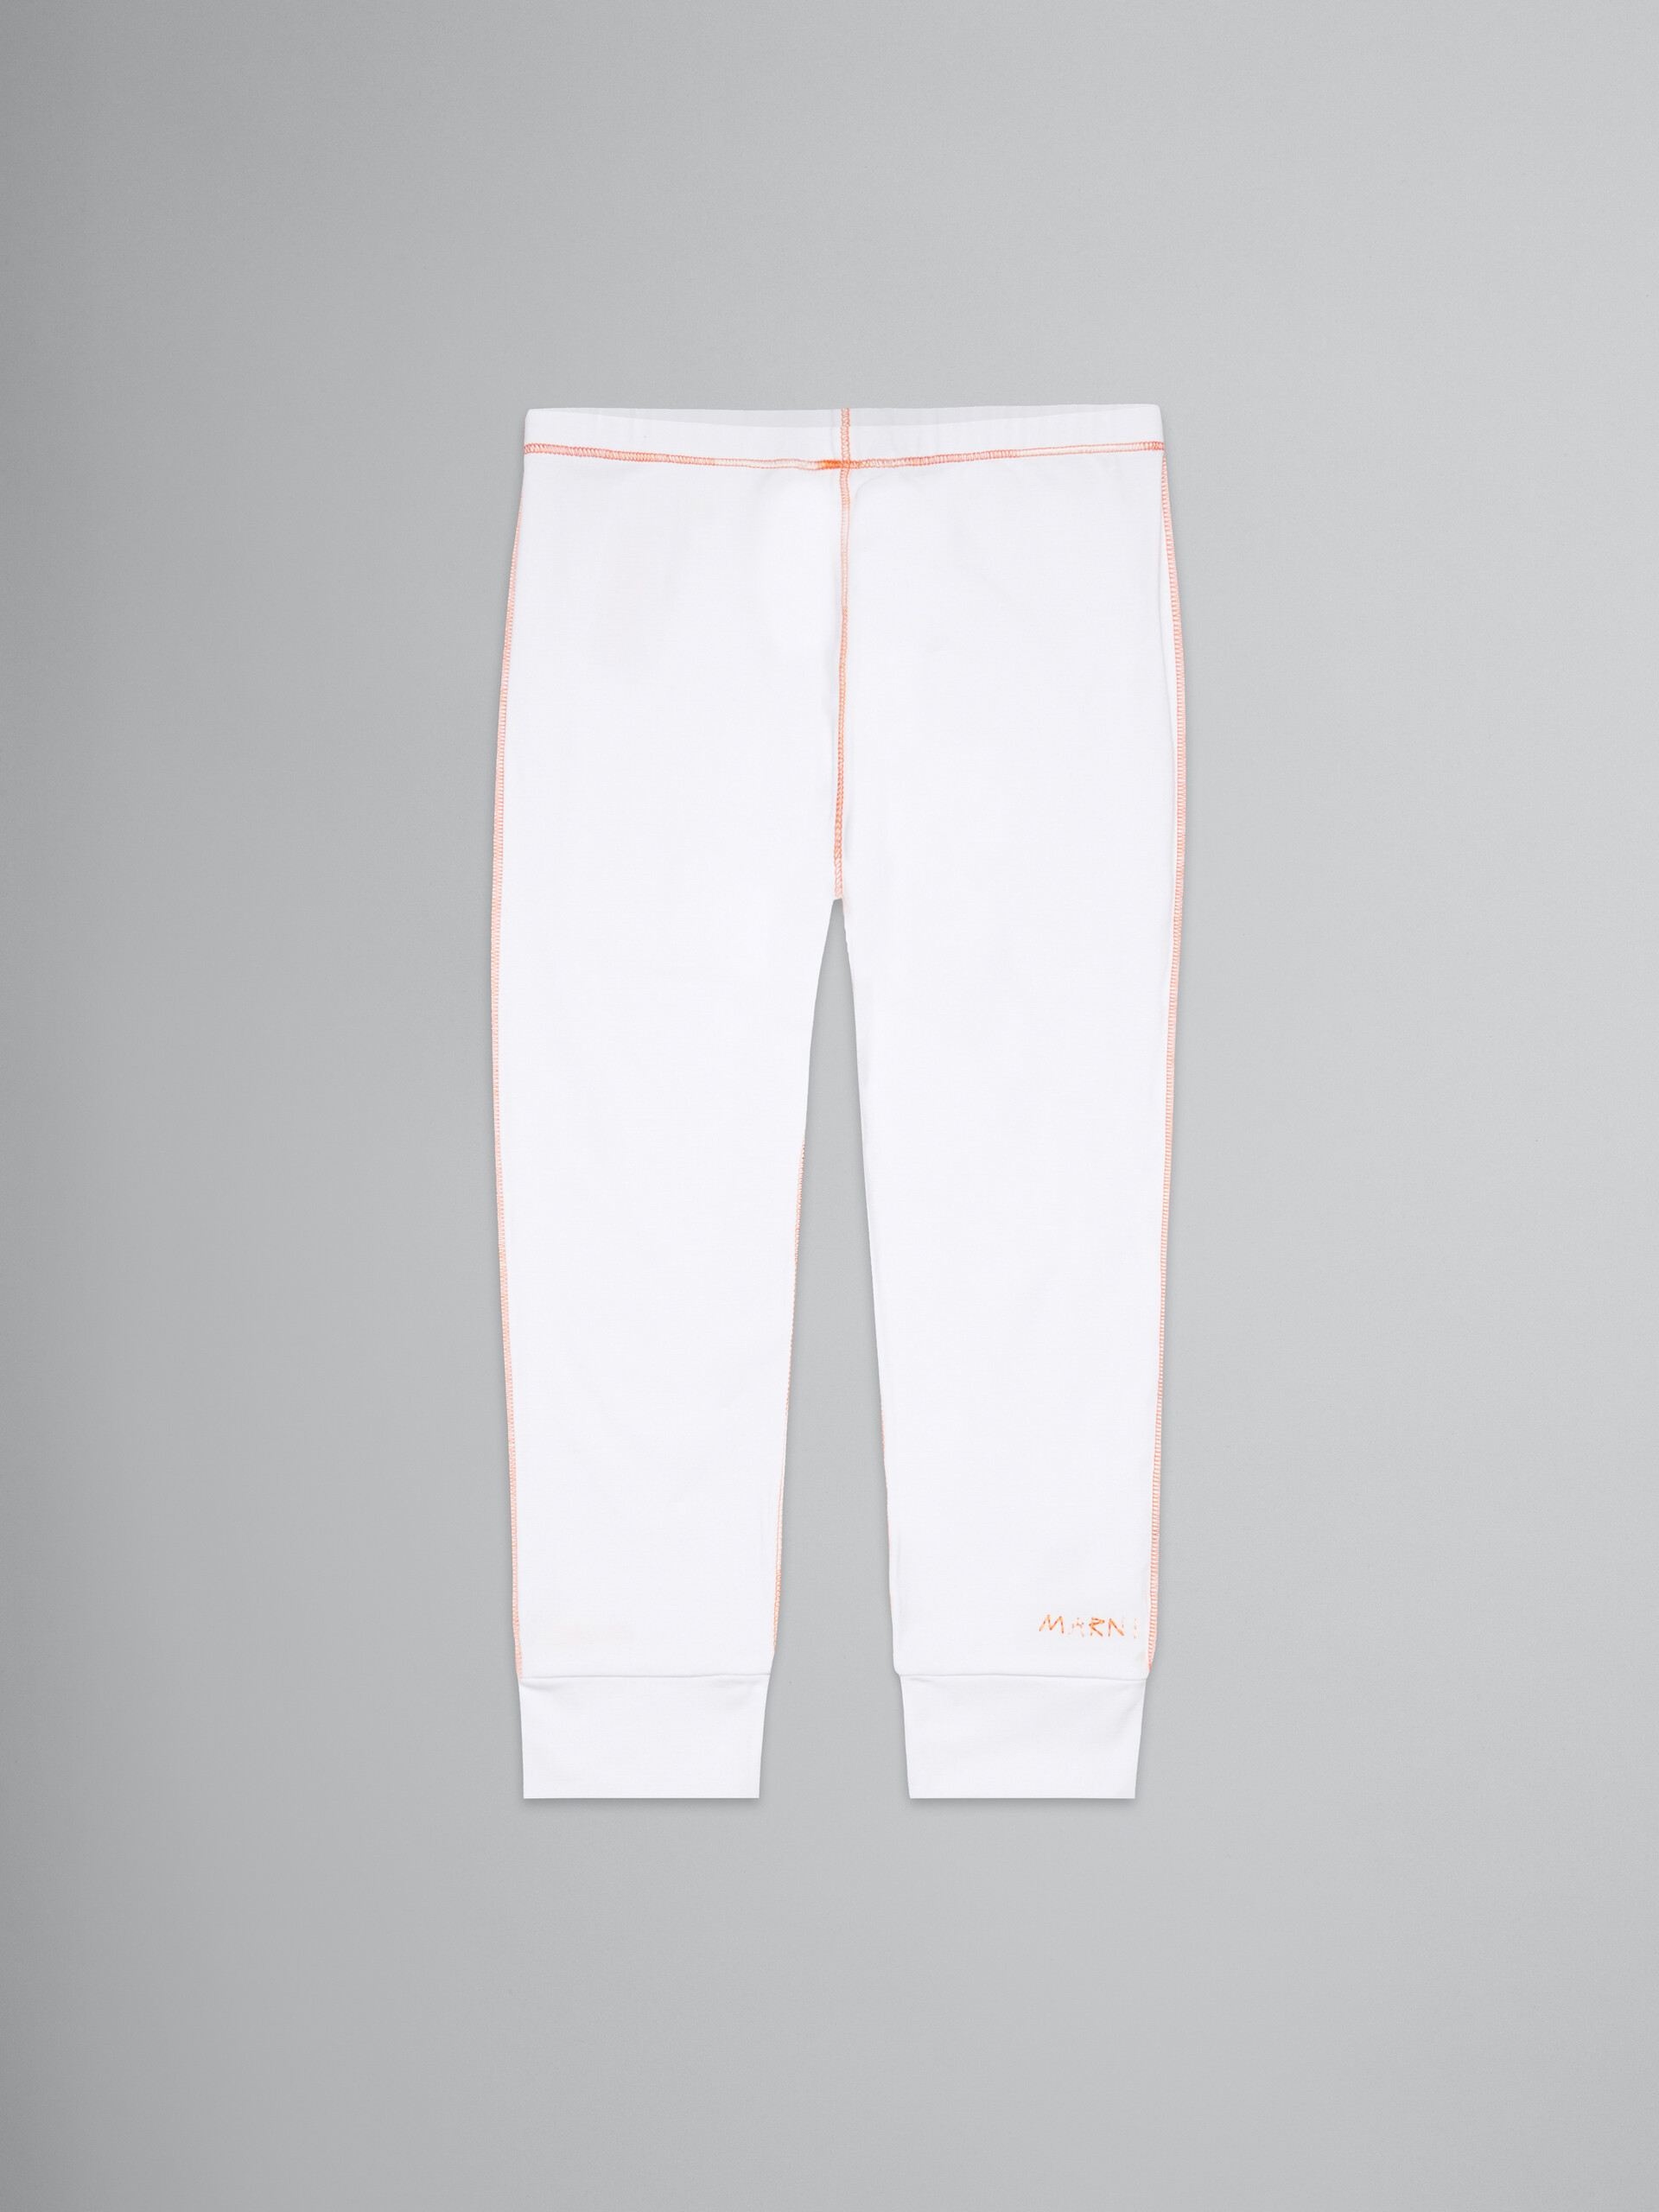 Whitw leggings pants with stitching - Pants - Image 1